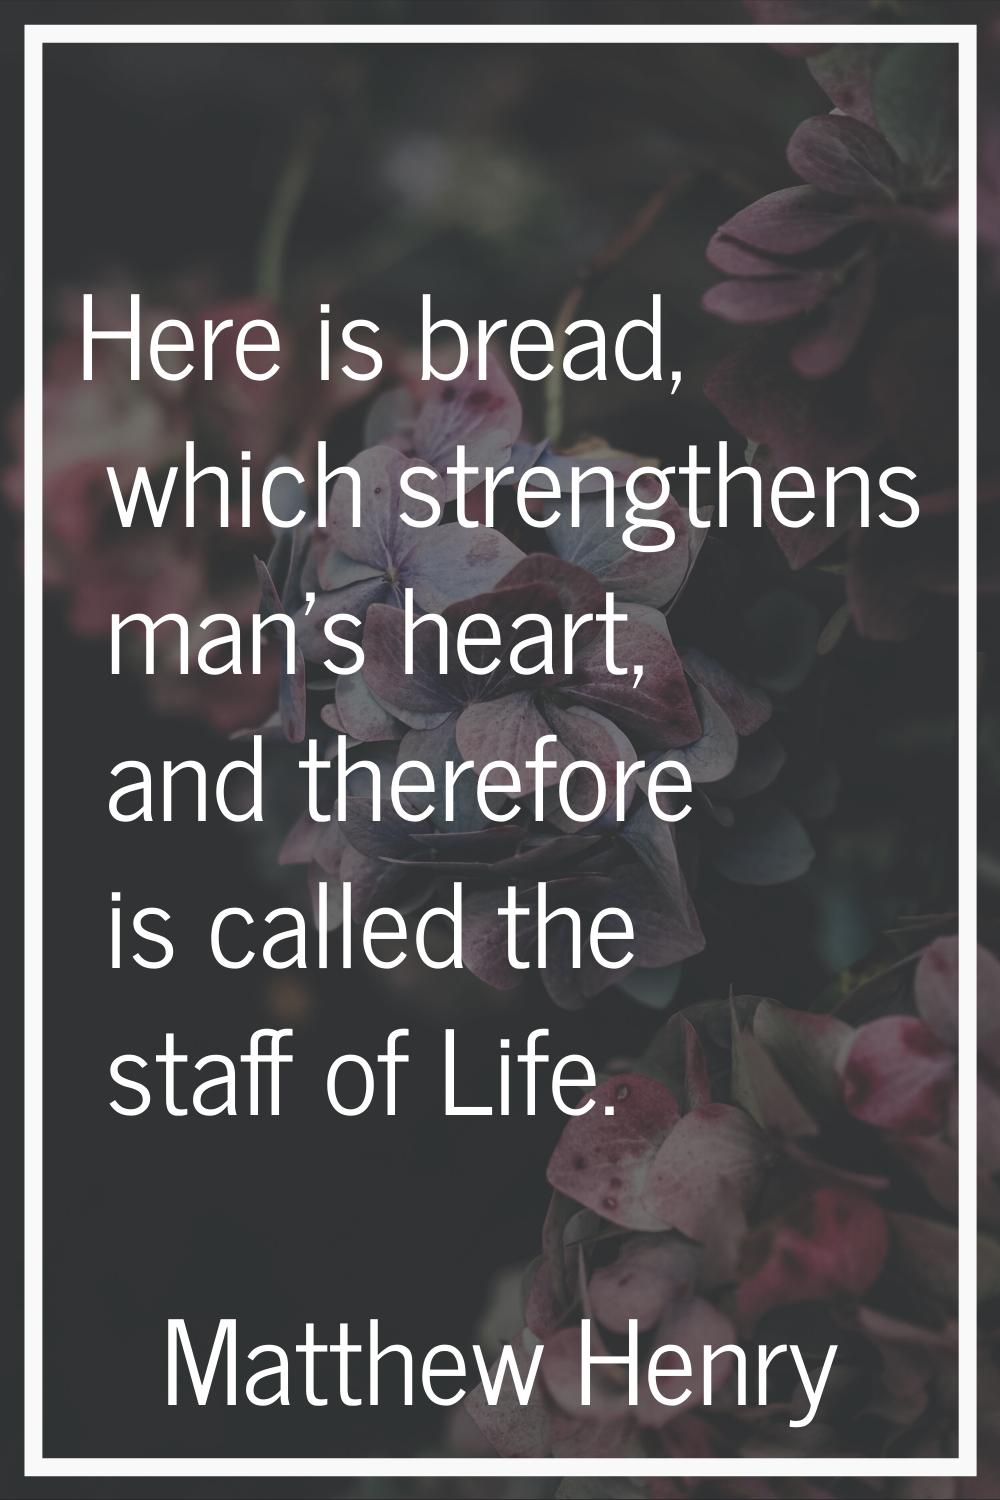 Here is bread, which strengthens man's heart, and therefore is called the staff of Life.